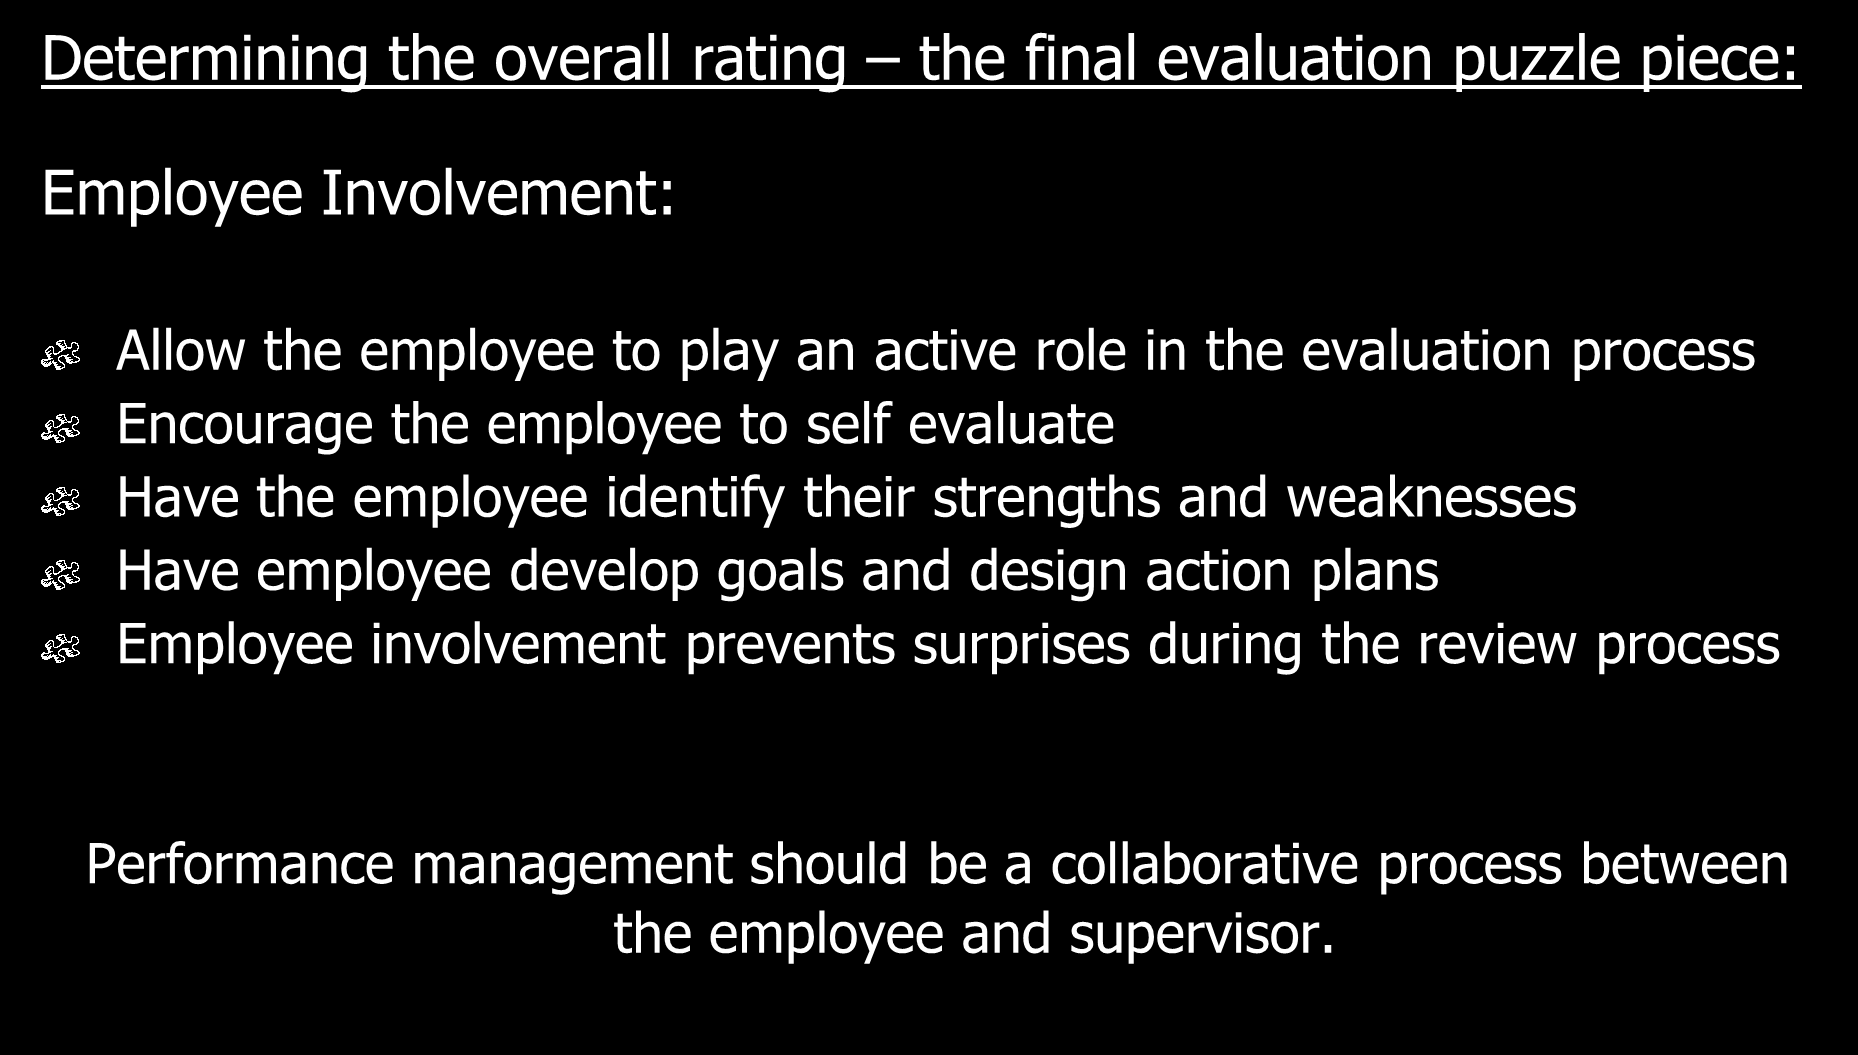 Determining the overall rating the final evaluation puzzle piece: Employee Involvement: Allow the employee to play an active role in the evaluation process Encourage the employee to self evaluate